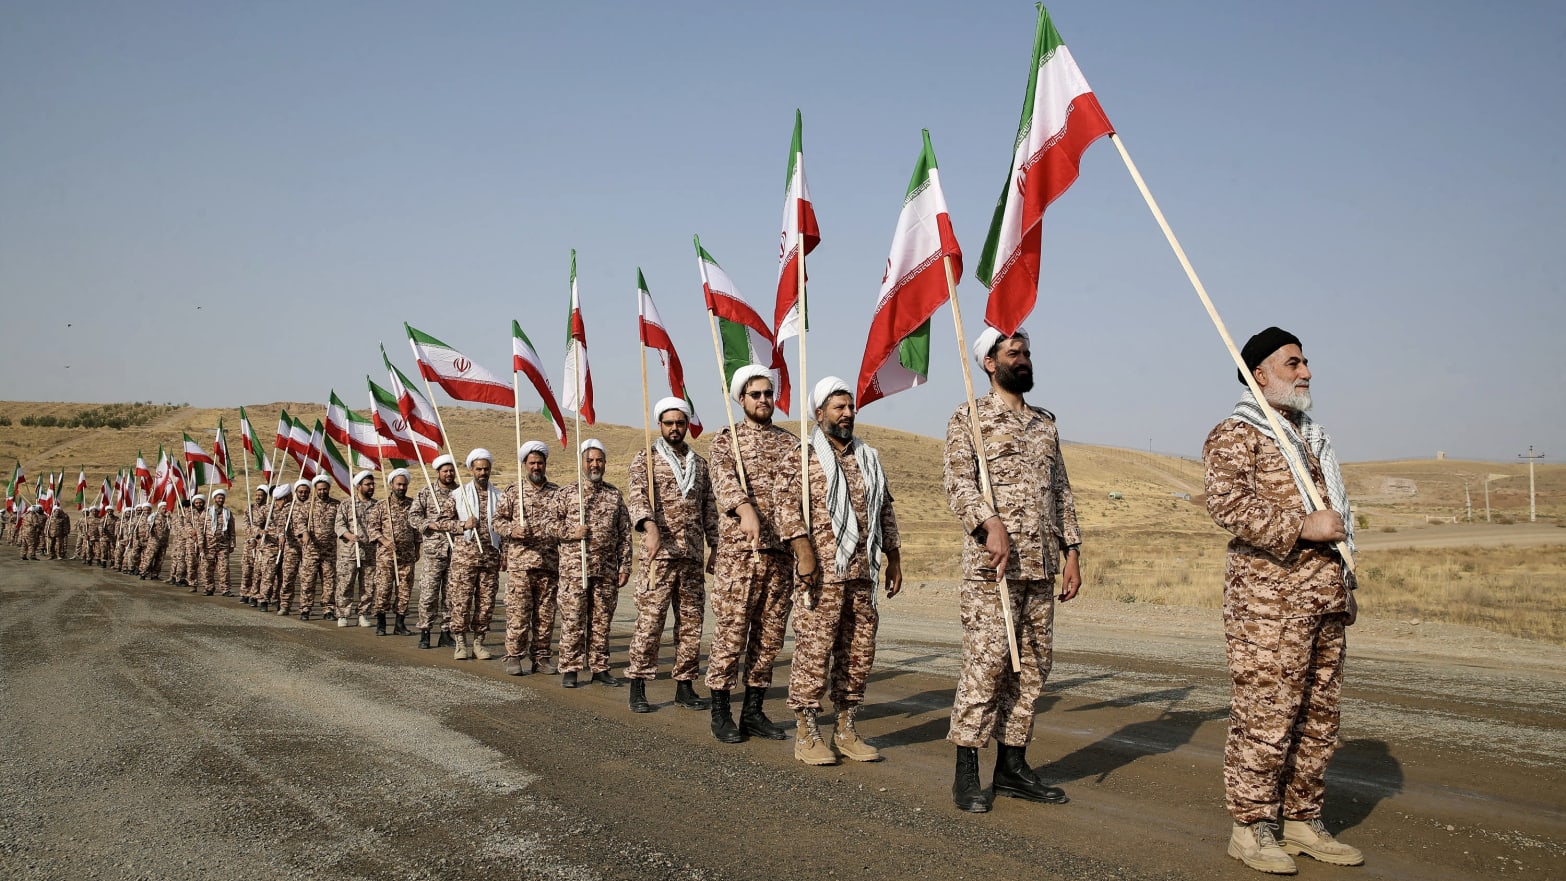 Members of the Islamic Revolutionary Guard Corps (IRGC) stand in a row carrying flags at a military drill